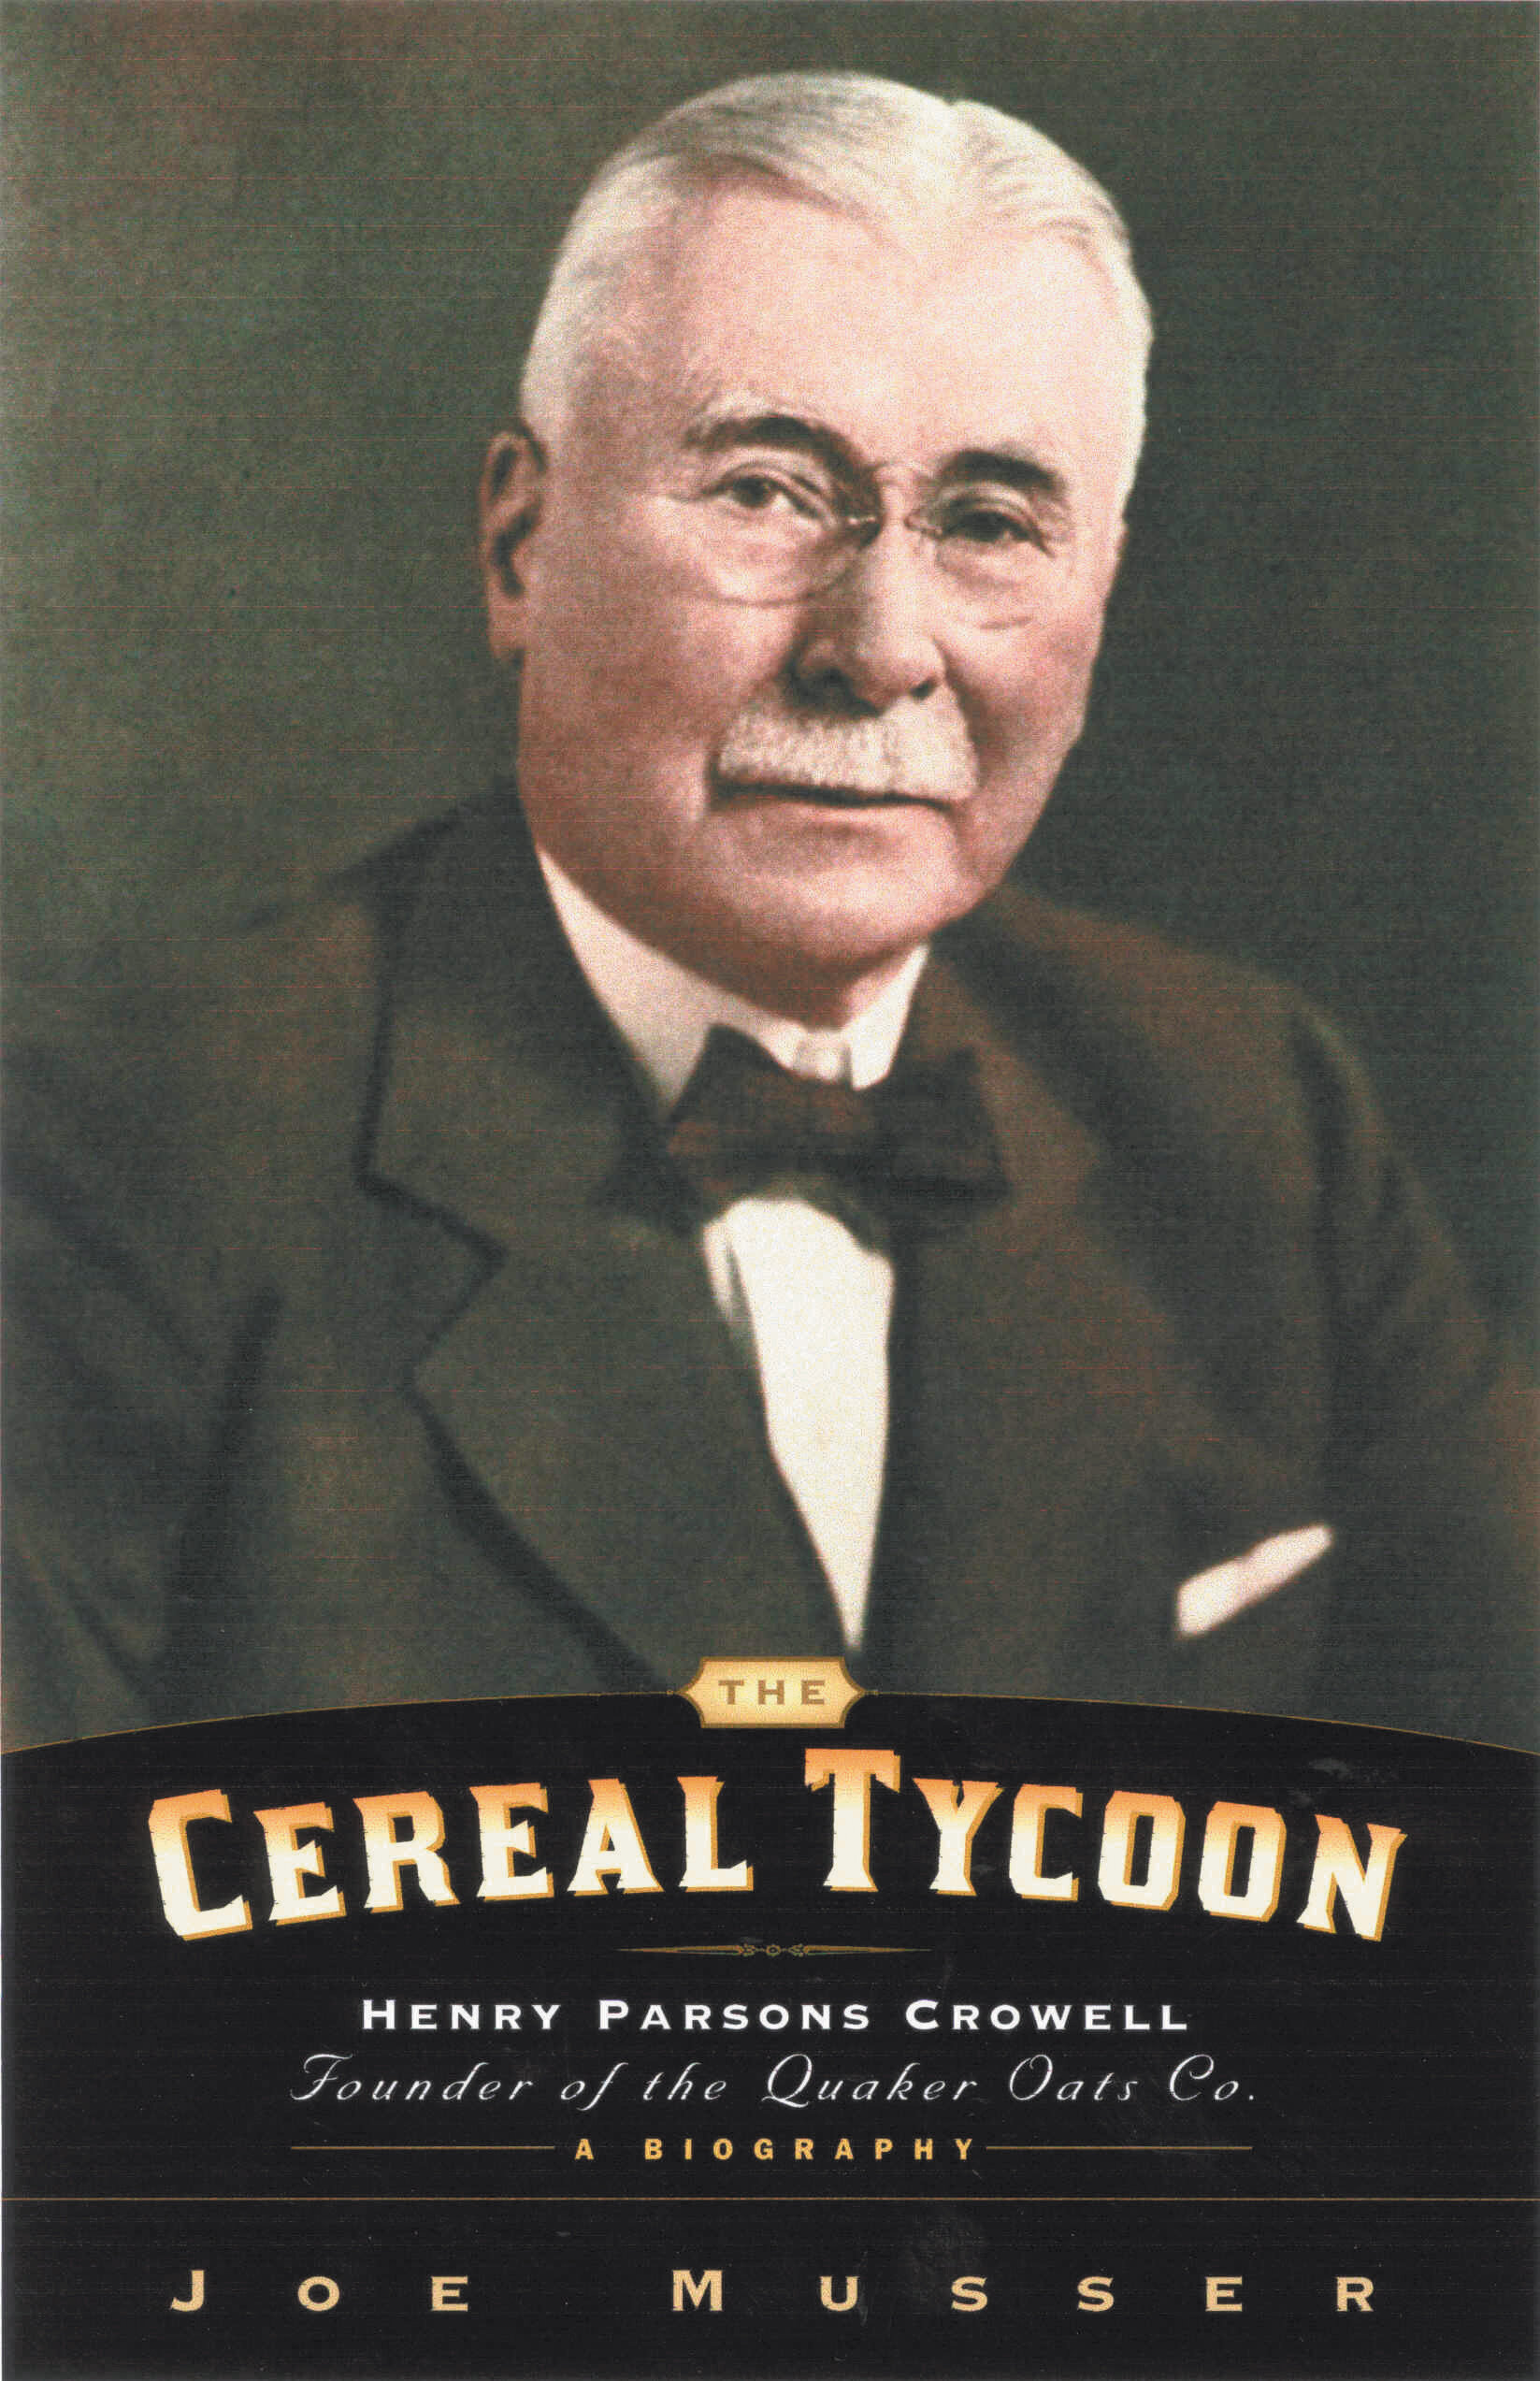 Cereal Tycoon: Henry Parsons Crowell Founder of the Quaker Oats Co. - Faithlife.com